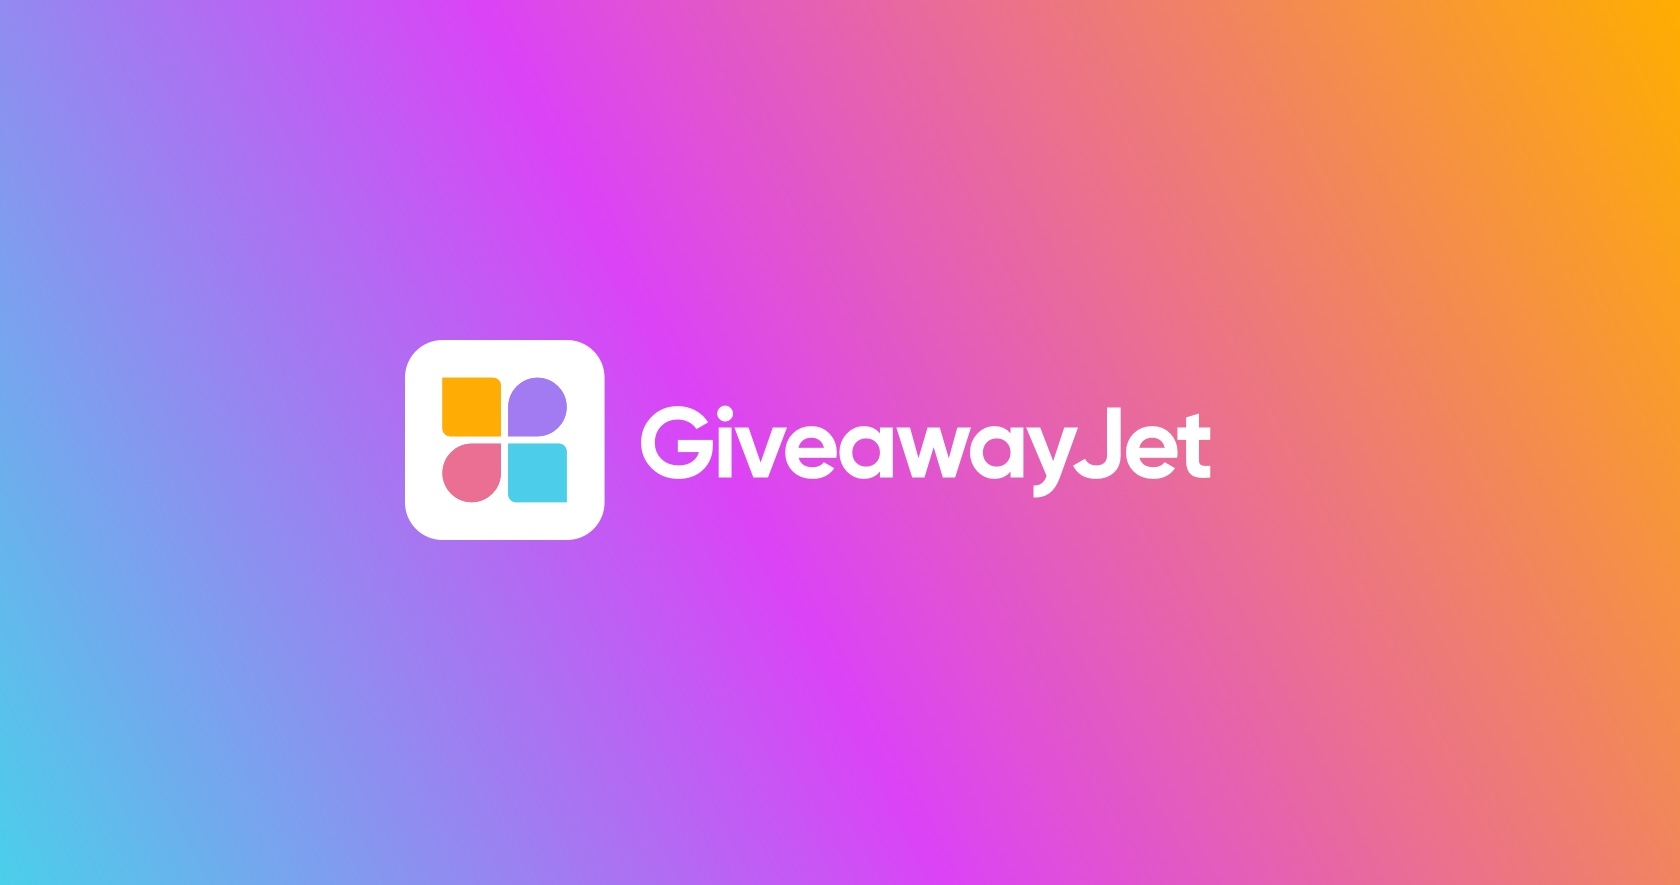 Free Giveaway Picker for Instagram